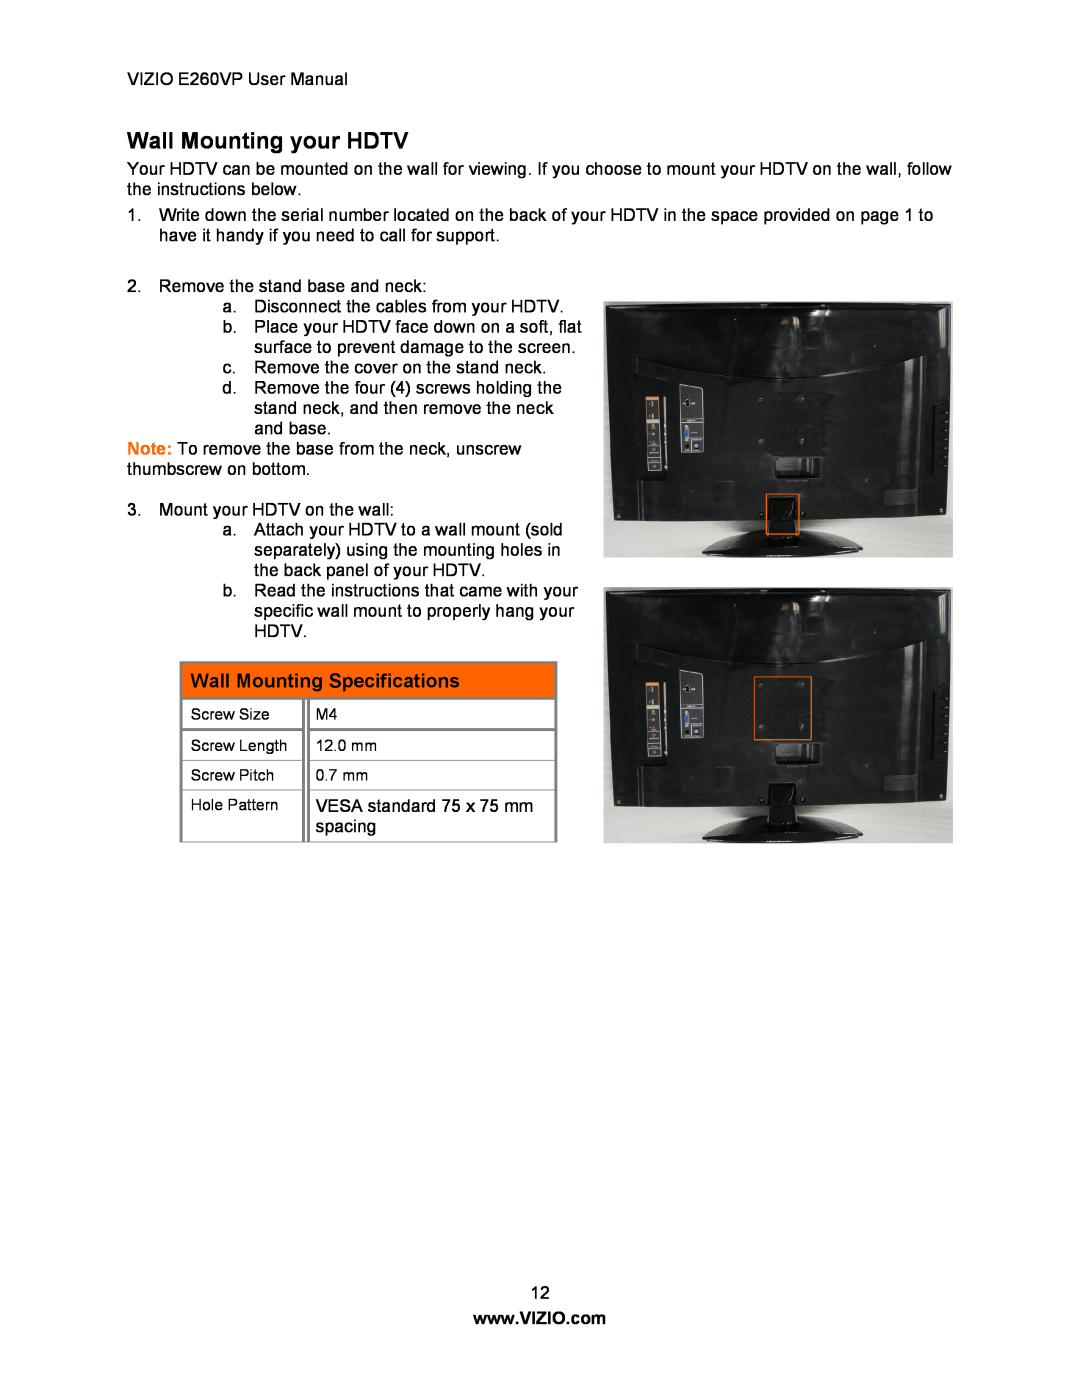 Vizio E260VP user manual Wall Mounting your HDTV, Wall Mounting Specifications 